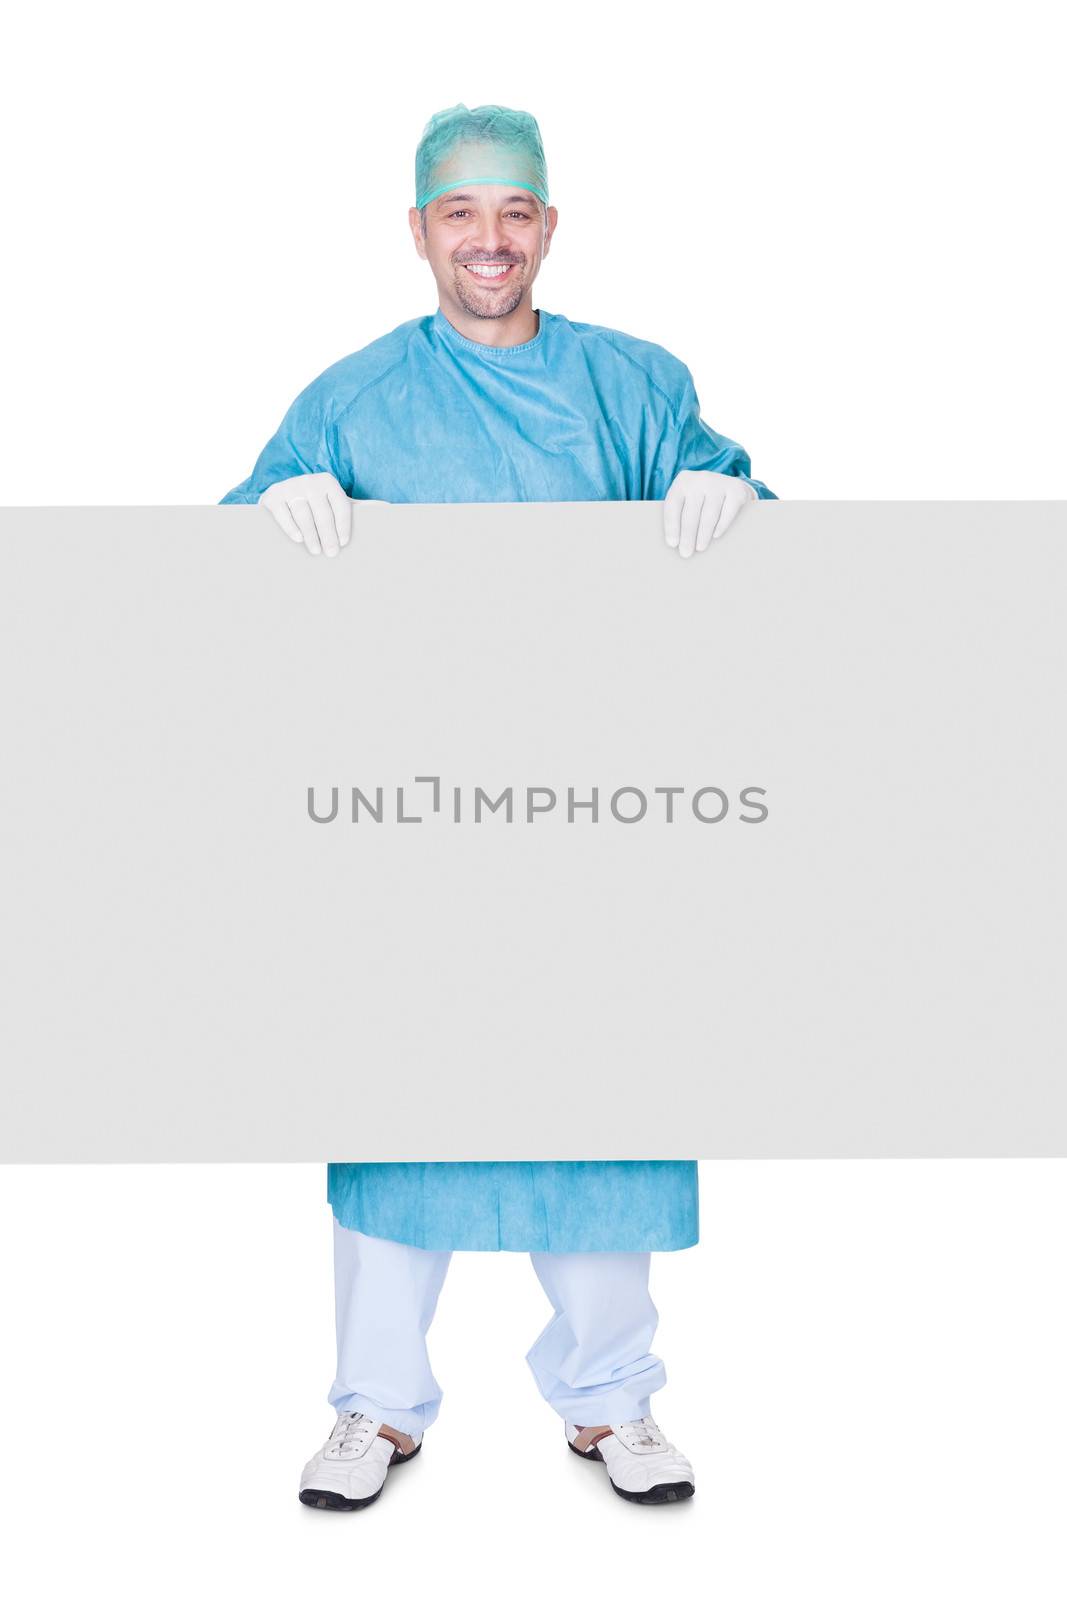 Doctor In Operation Gown Holding Blank Placard On White Background